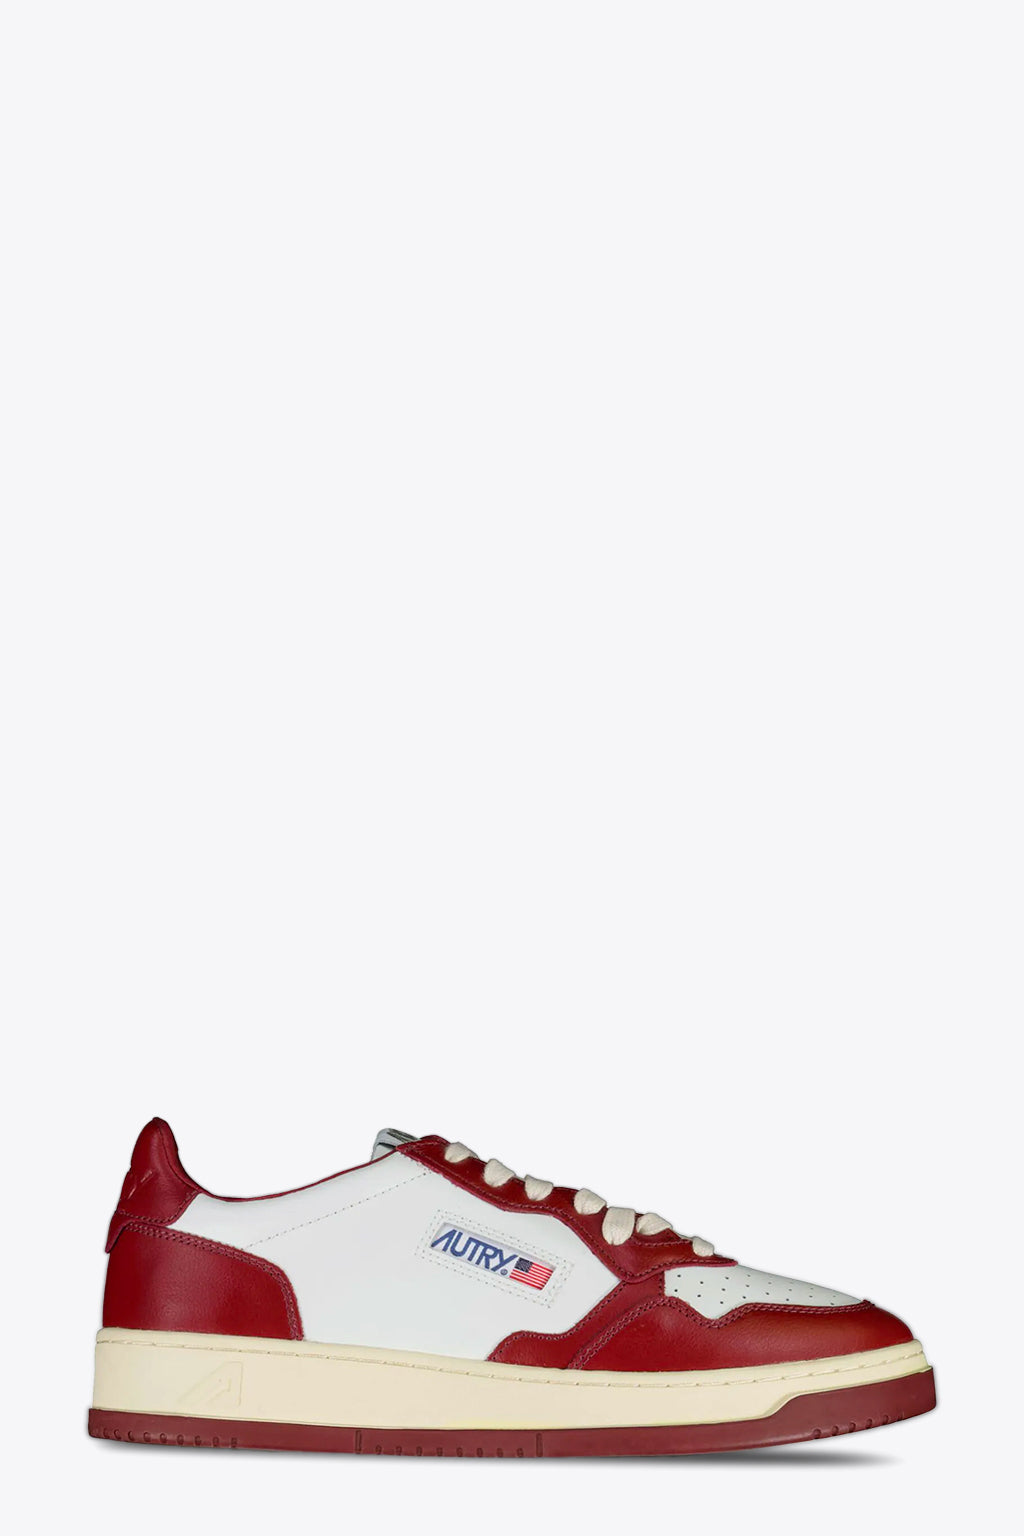 alt-image__Burgundy-and-white-leather-low-sneaker---Medalist